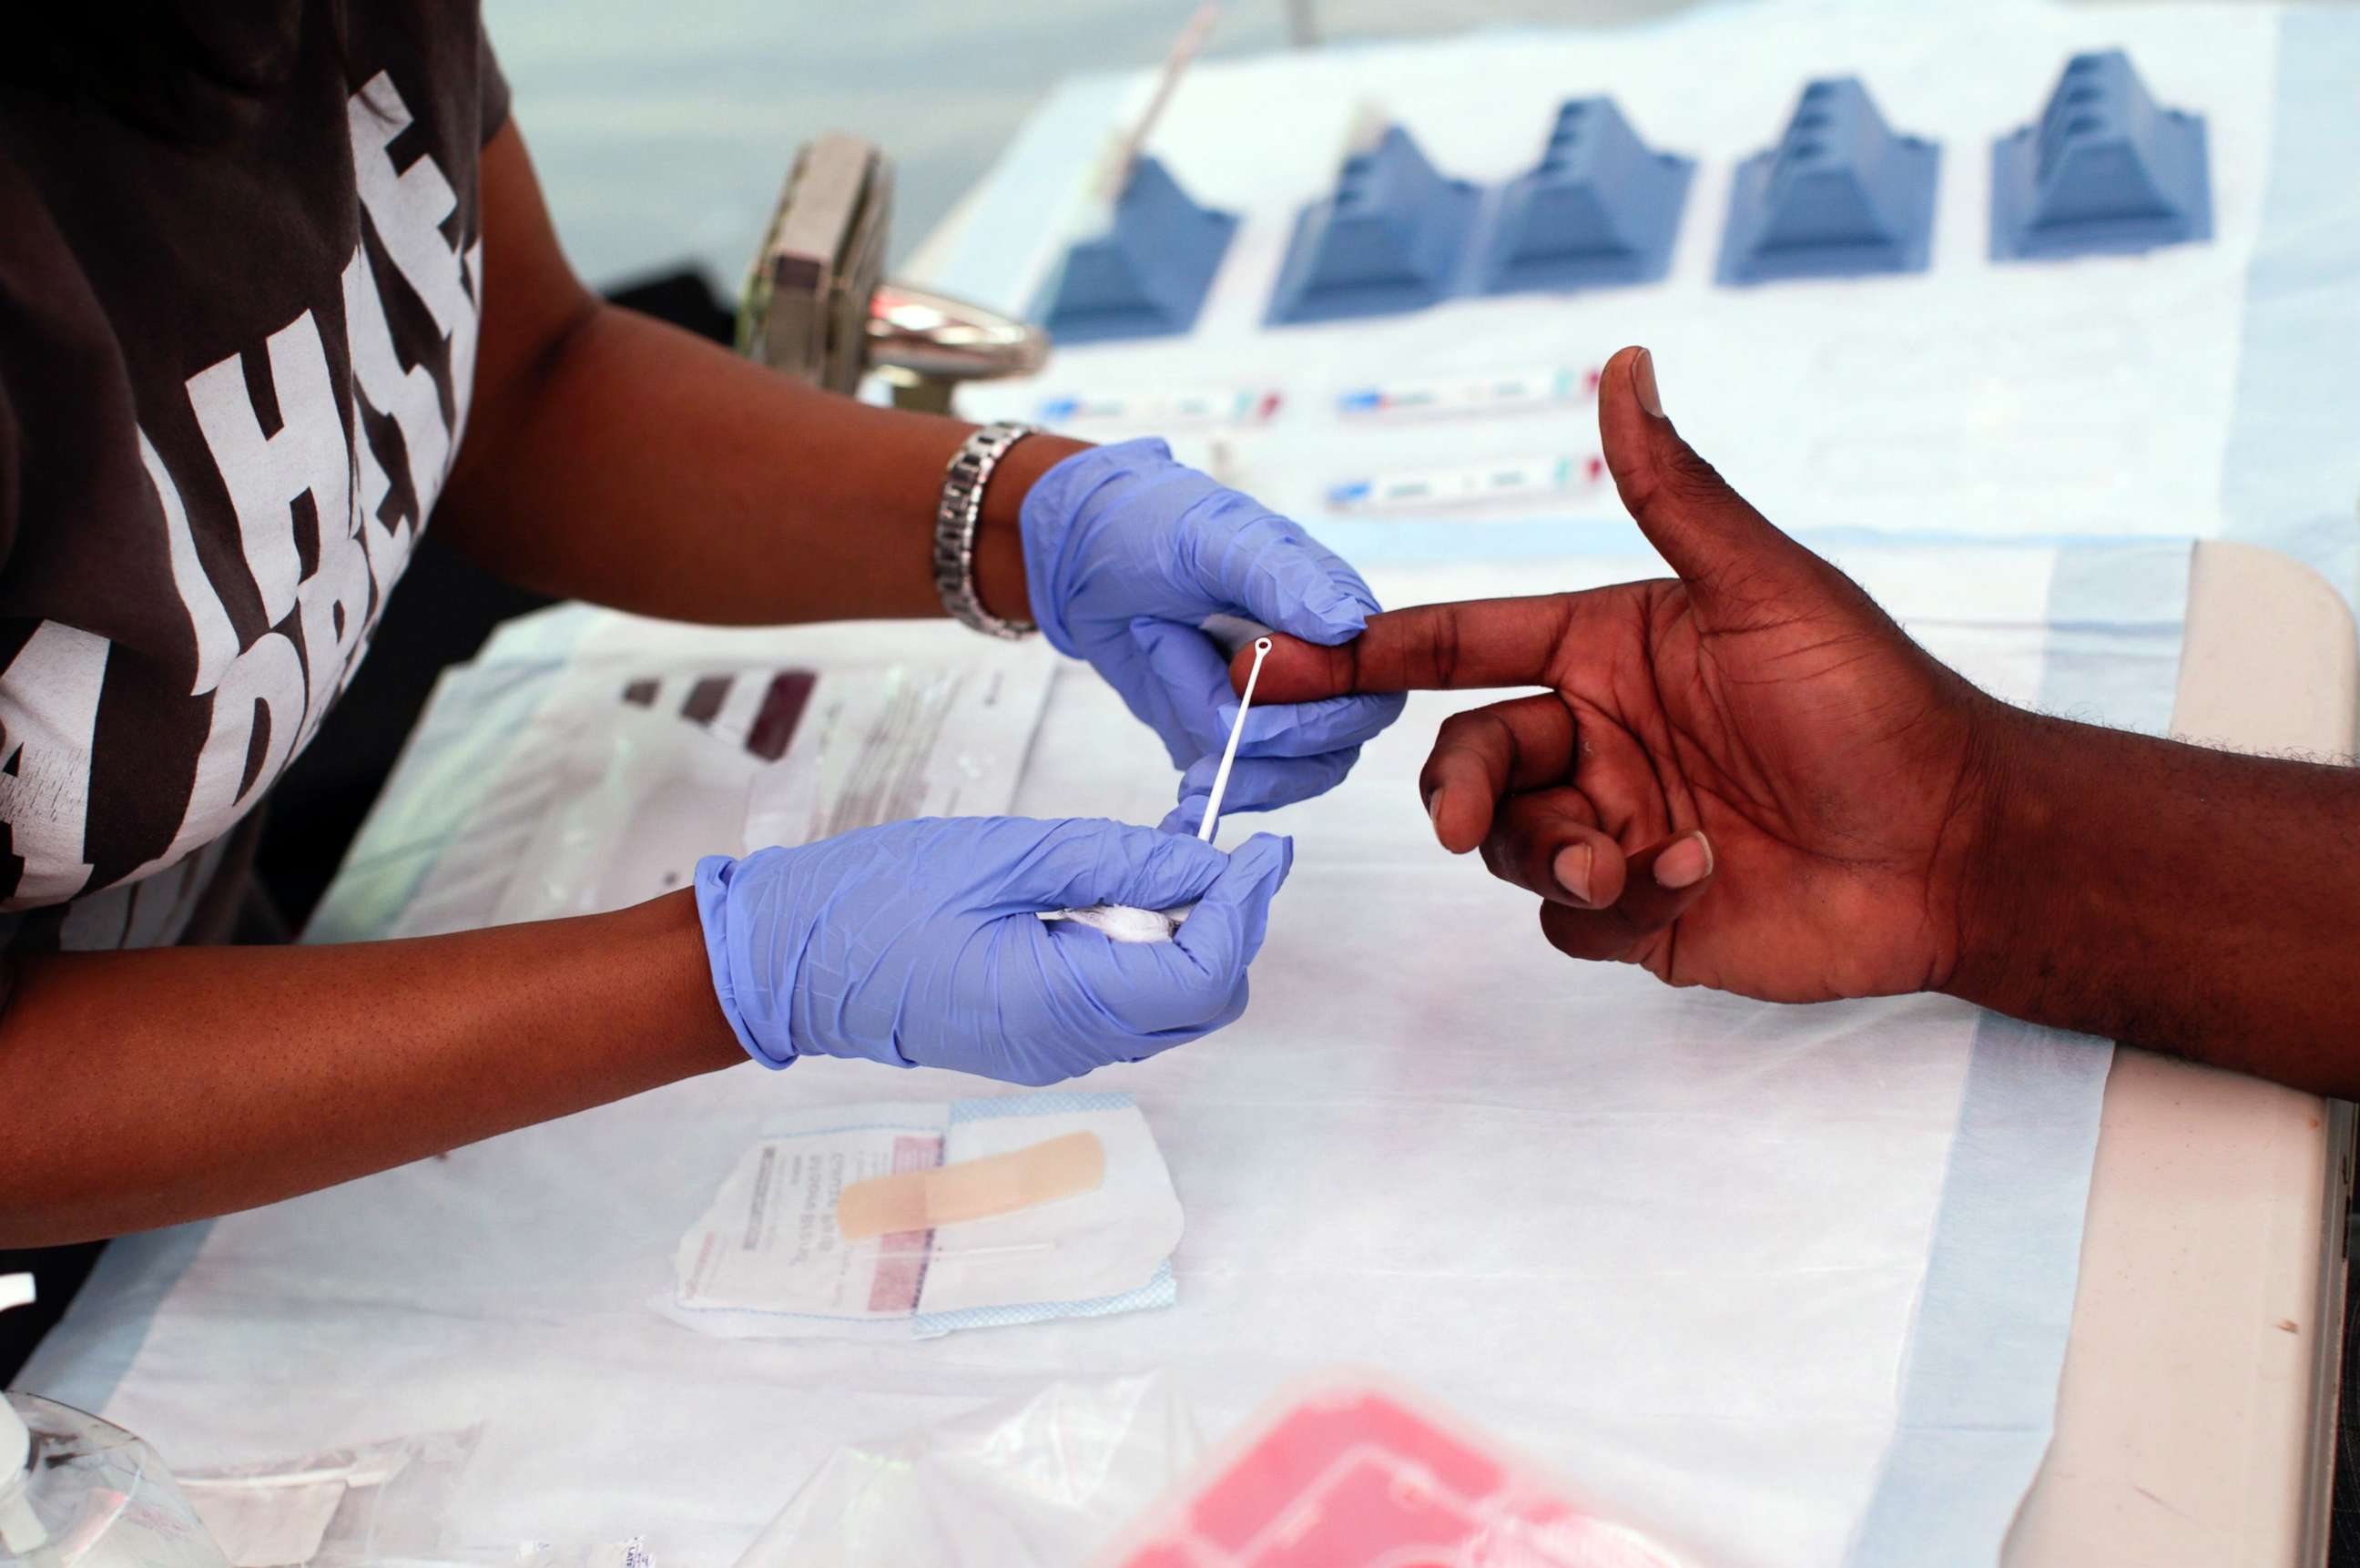 PHOTO: A man takes a free HIV test during the Harlem Pride parade in New York on June 29, 2019.